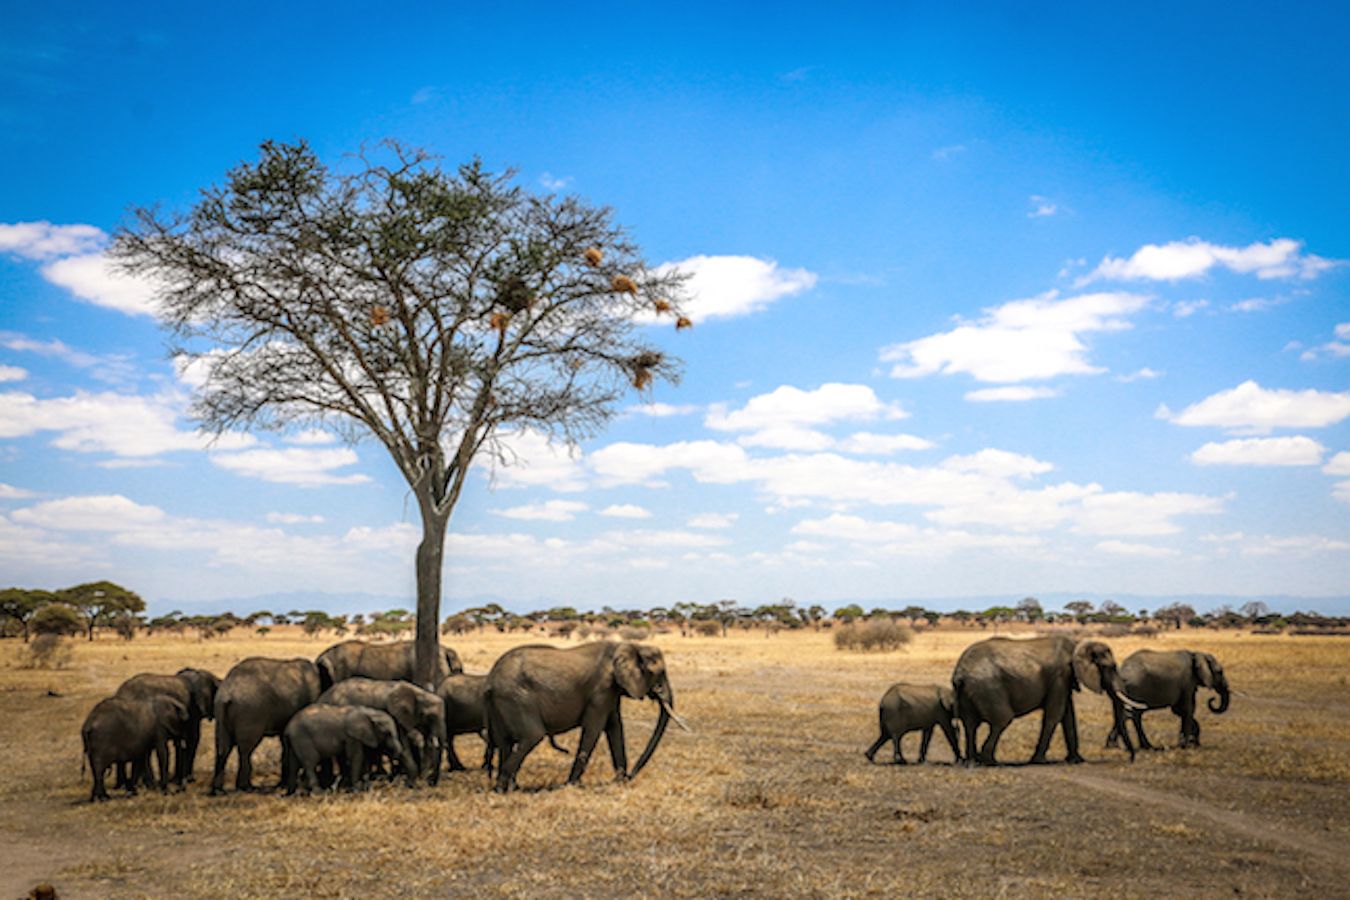 Tarangire is concentrated with animals